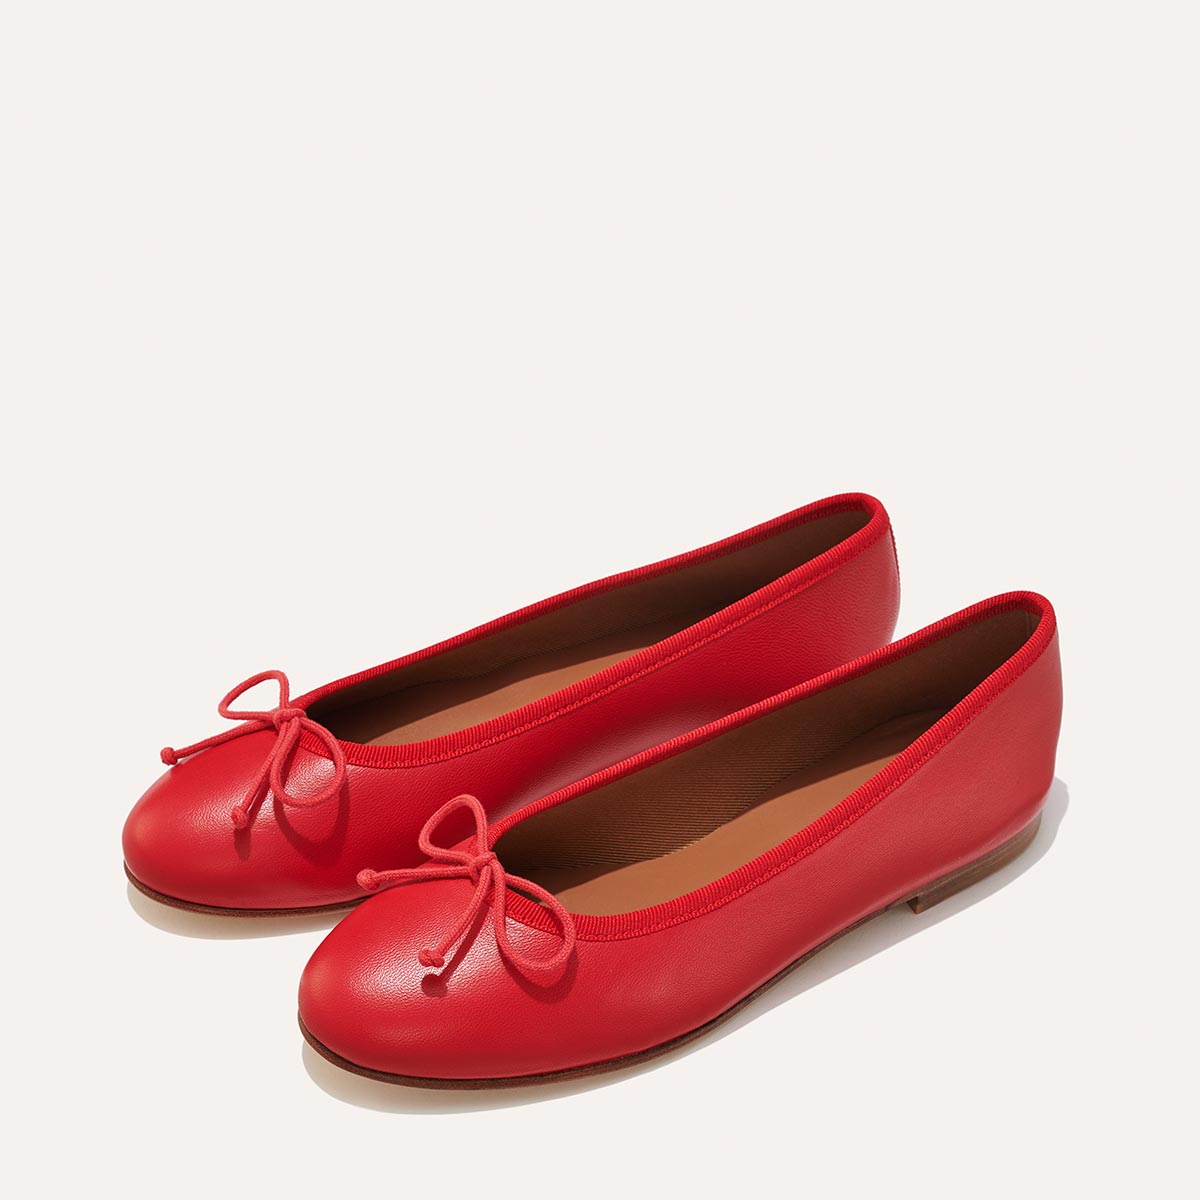 Margaux's classic and comfortable Demi ballet flat, made in a soft, red Italian nappa leather 